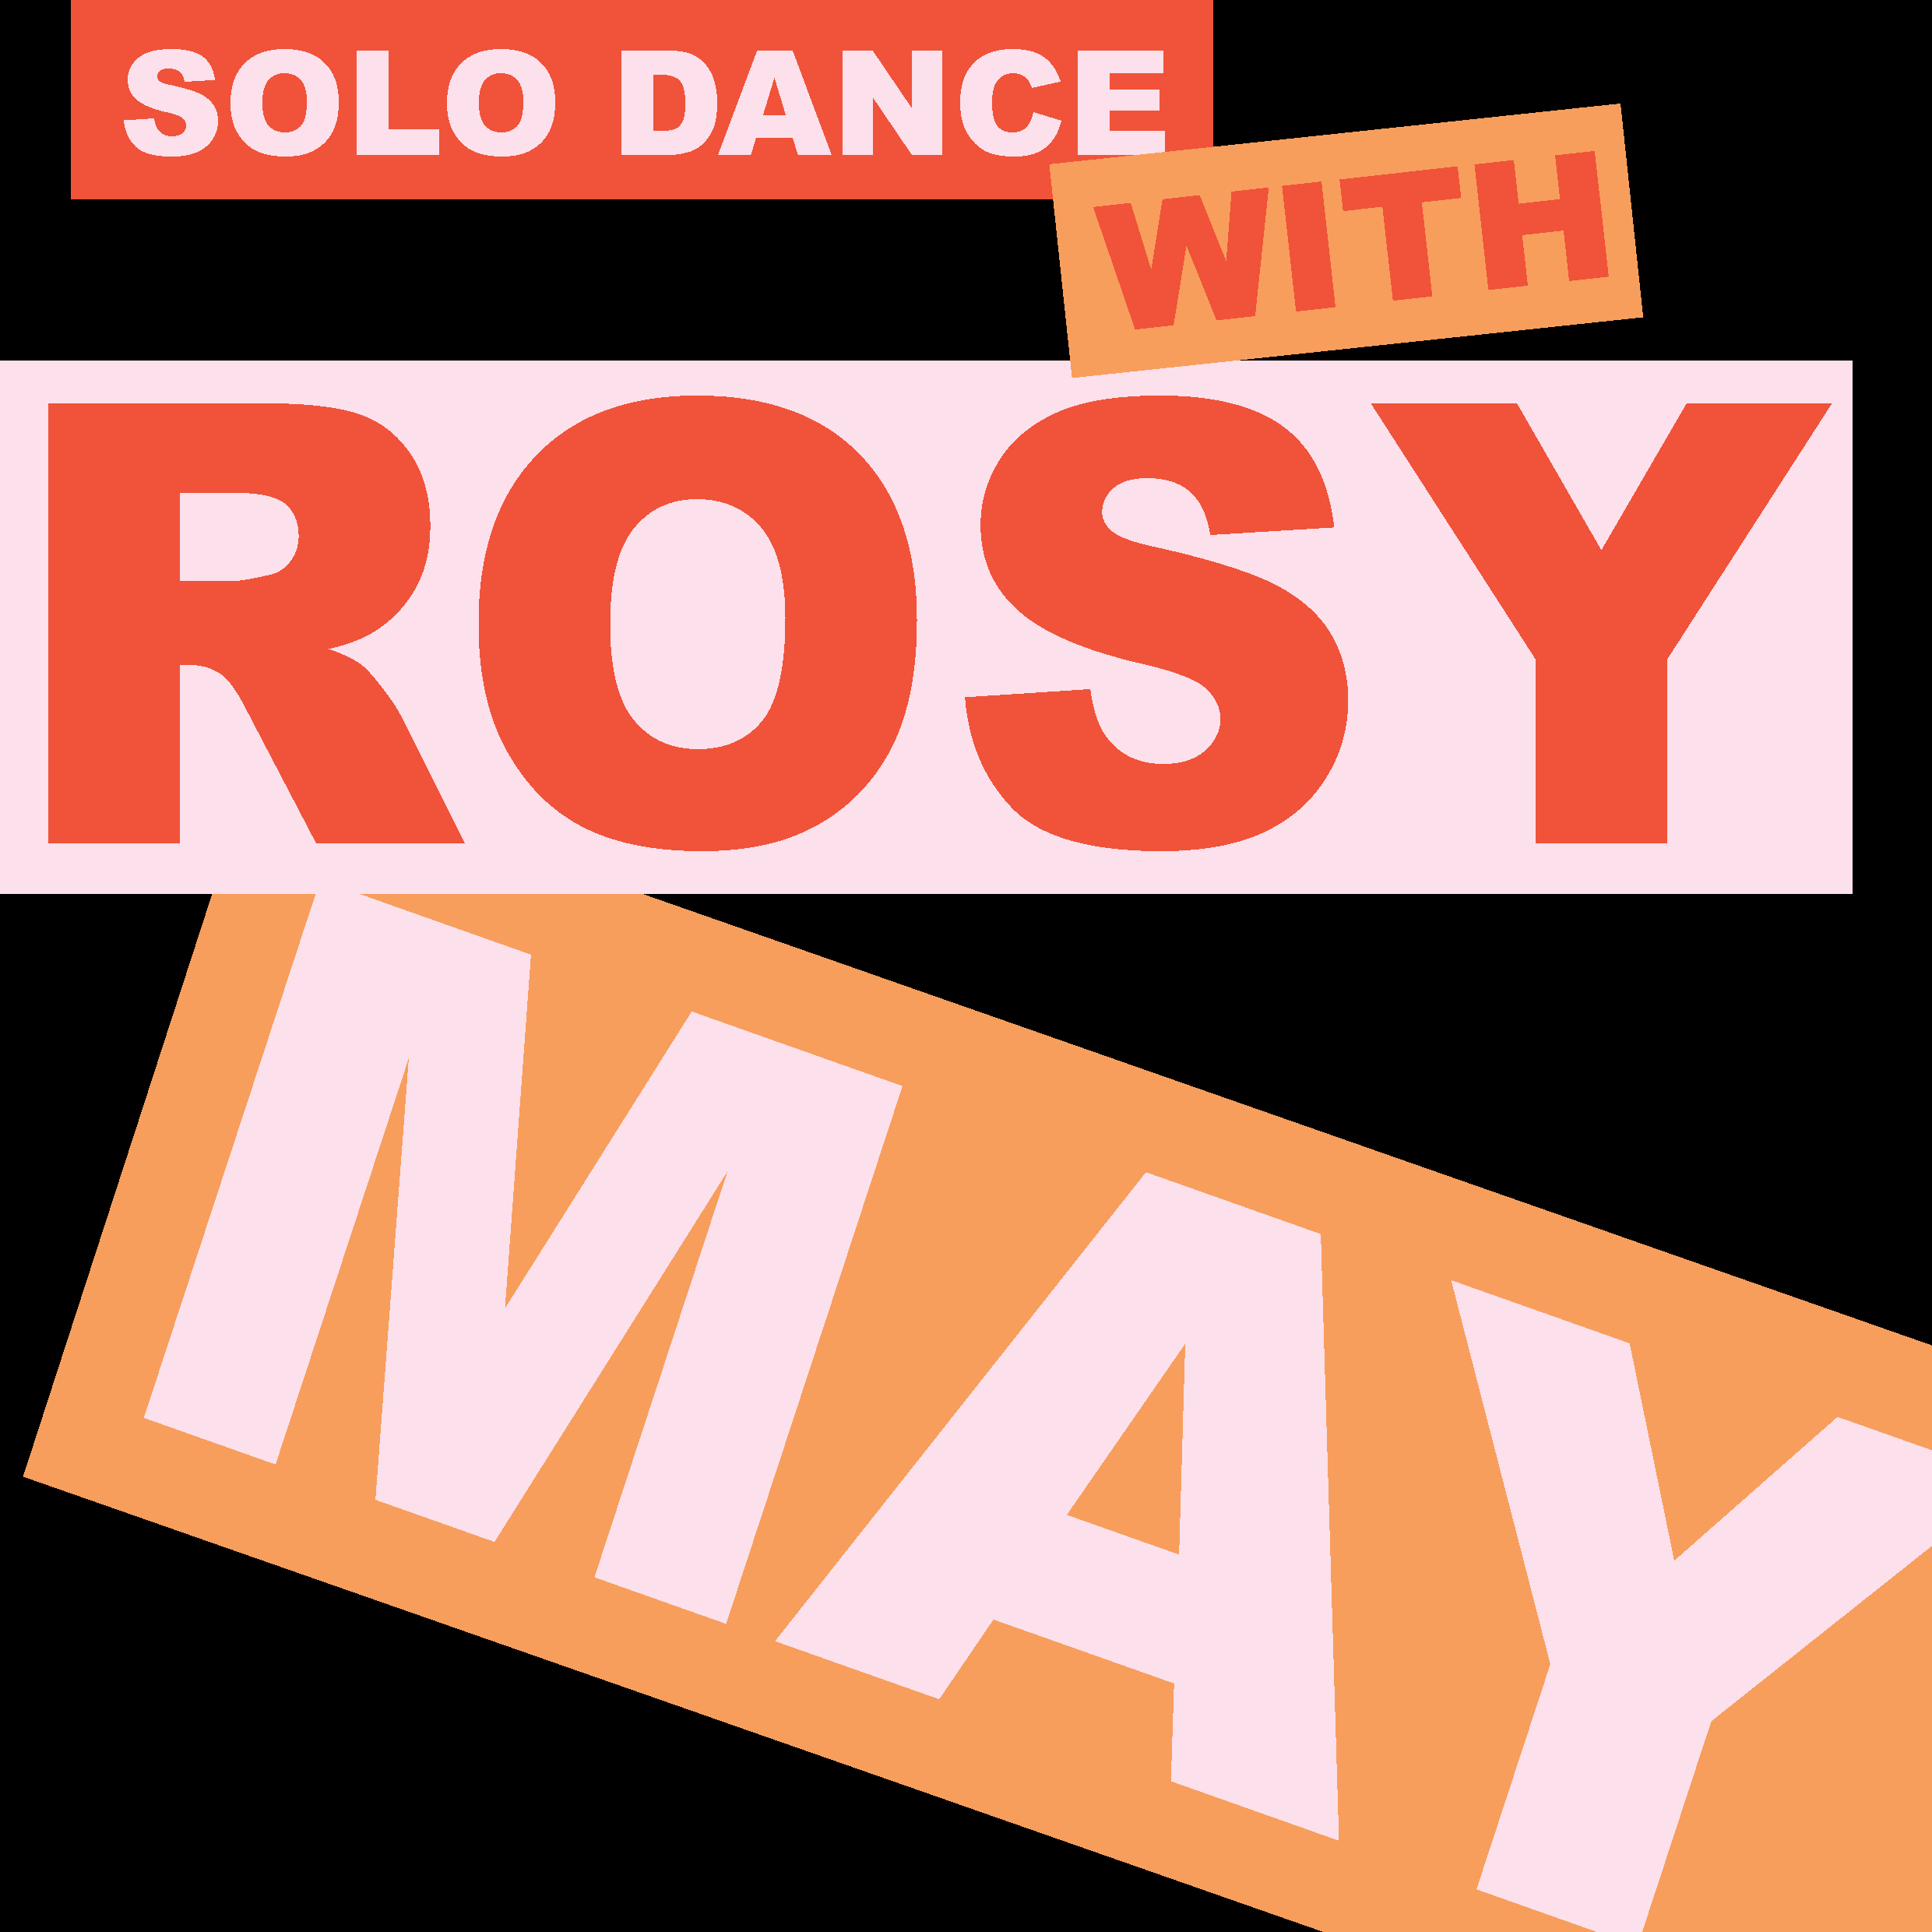 Solo Dance With Rosy May's logo